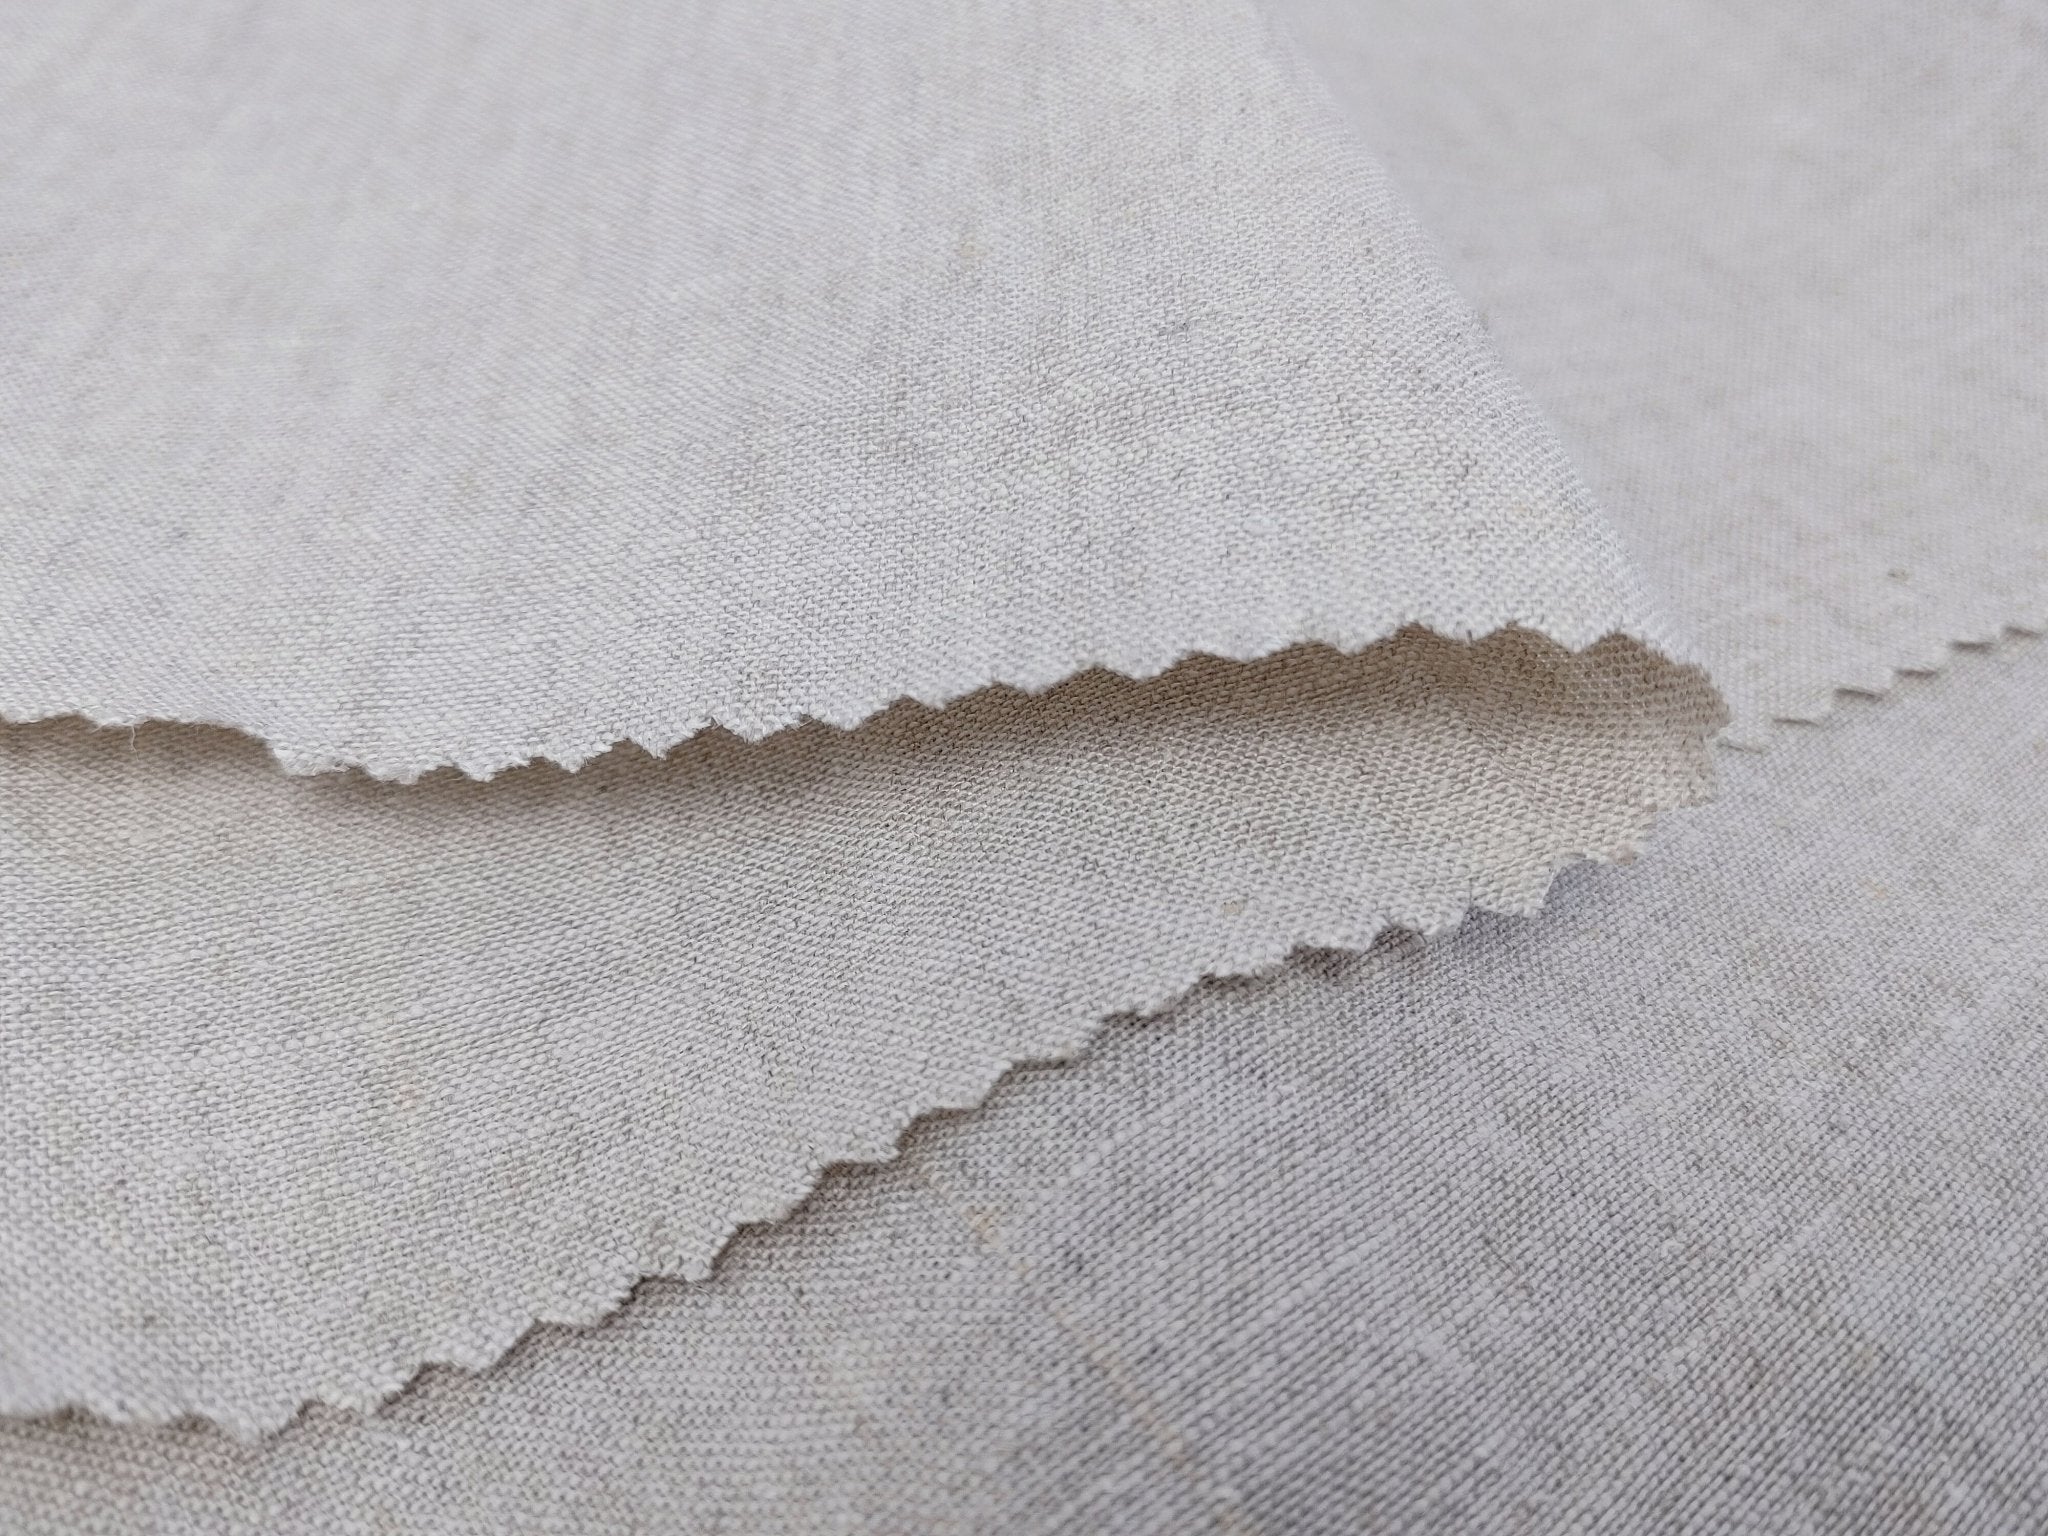 Vintage Dyed Medium Weight Linen Ramie Cotton Fabric with Plain Weave 7820 7771 7770 - The Linen Lab - Natural